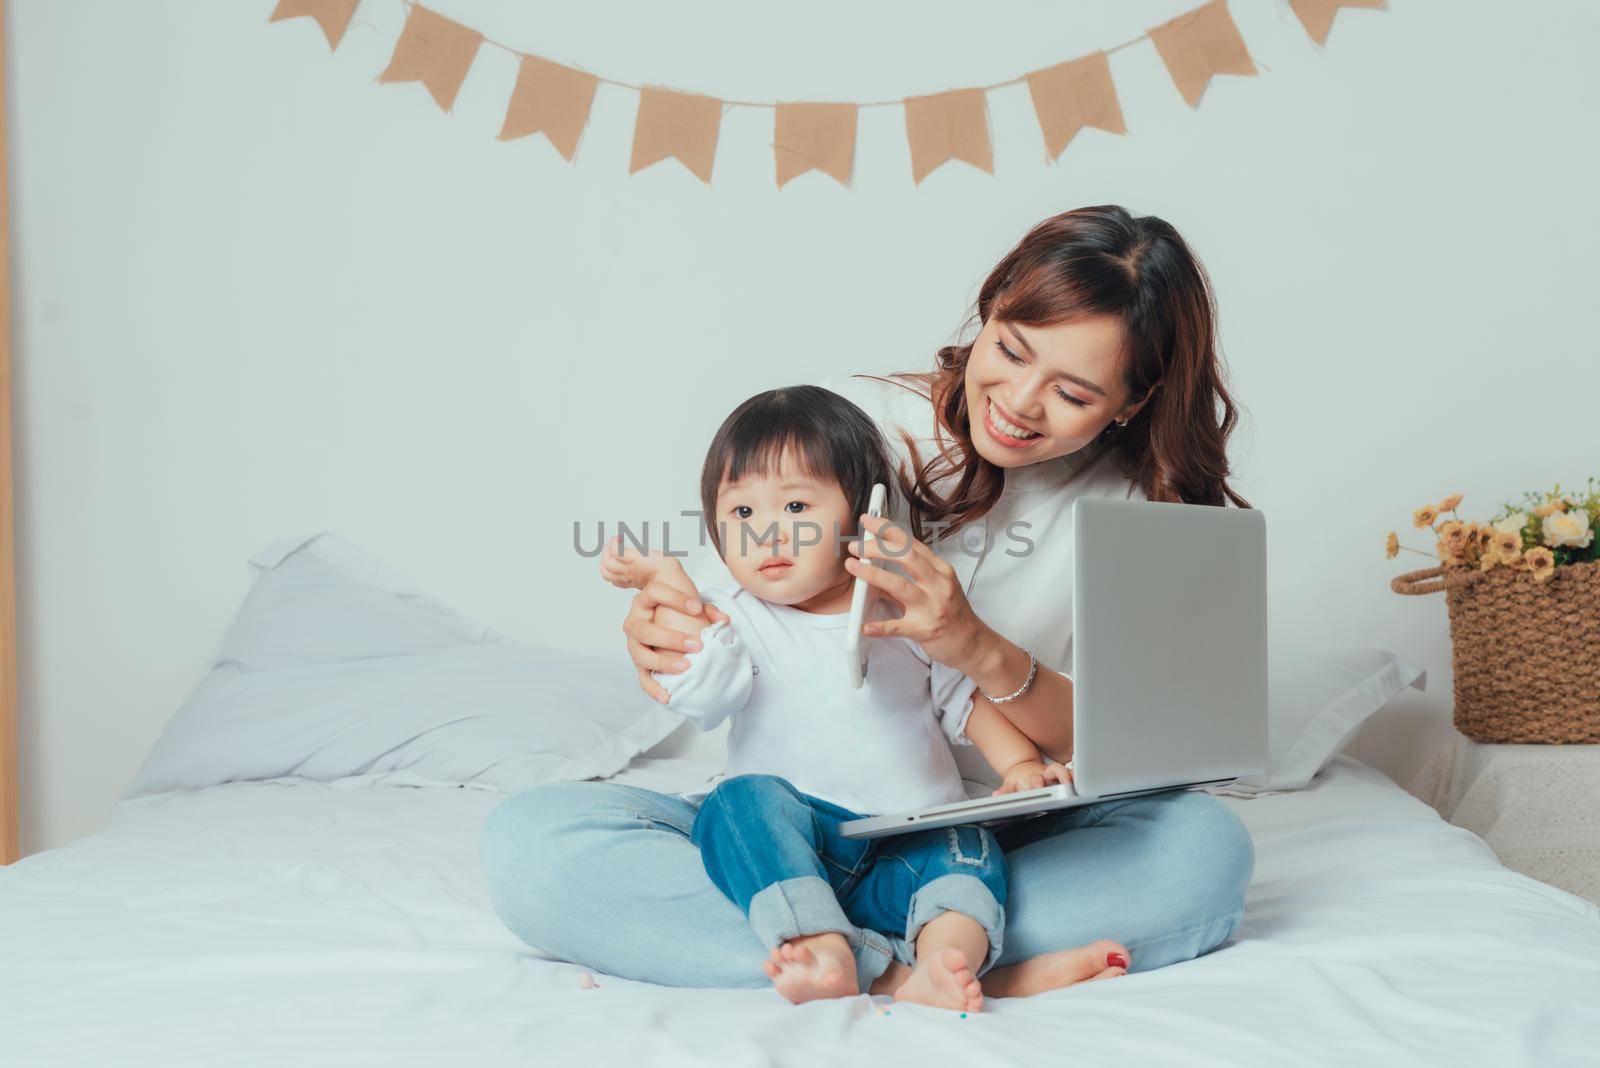 Daughter beside young mother using wireless technology